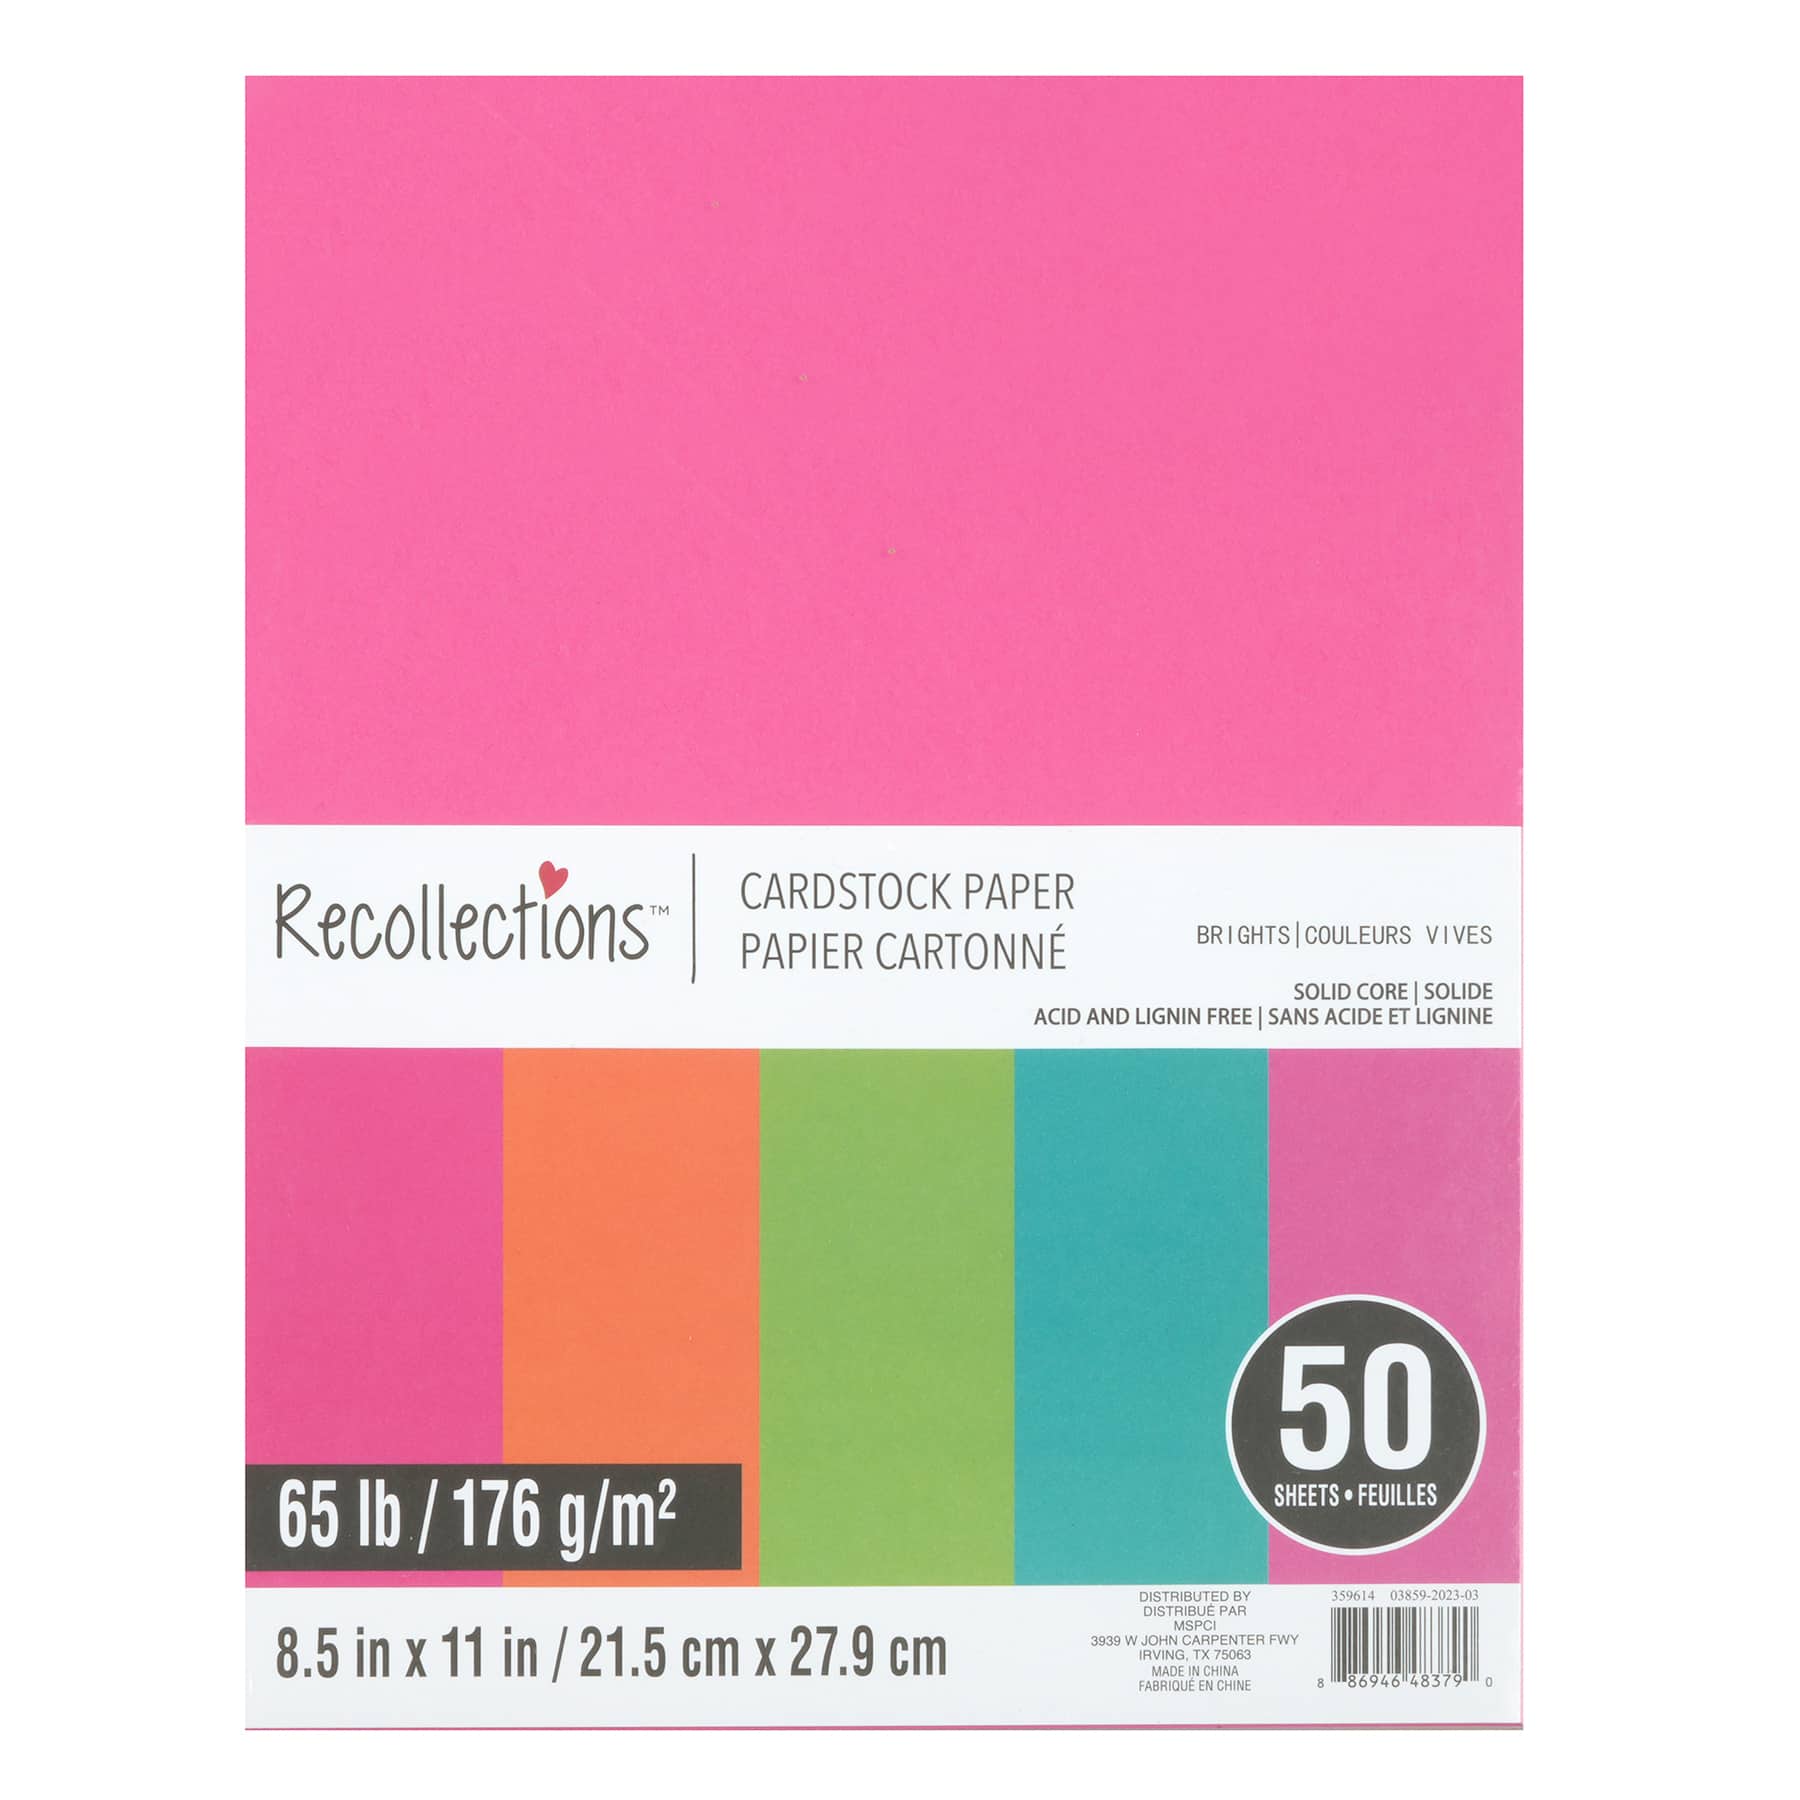 Michaels Bulk 6 Packs: 24 Ct. (144 Total) Glitter 12 inch x 12 inch Cardstock Paper by Recollections, Size: 12 x 12, Silver